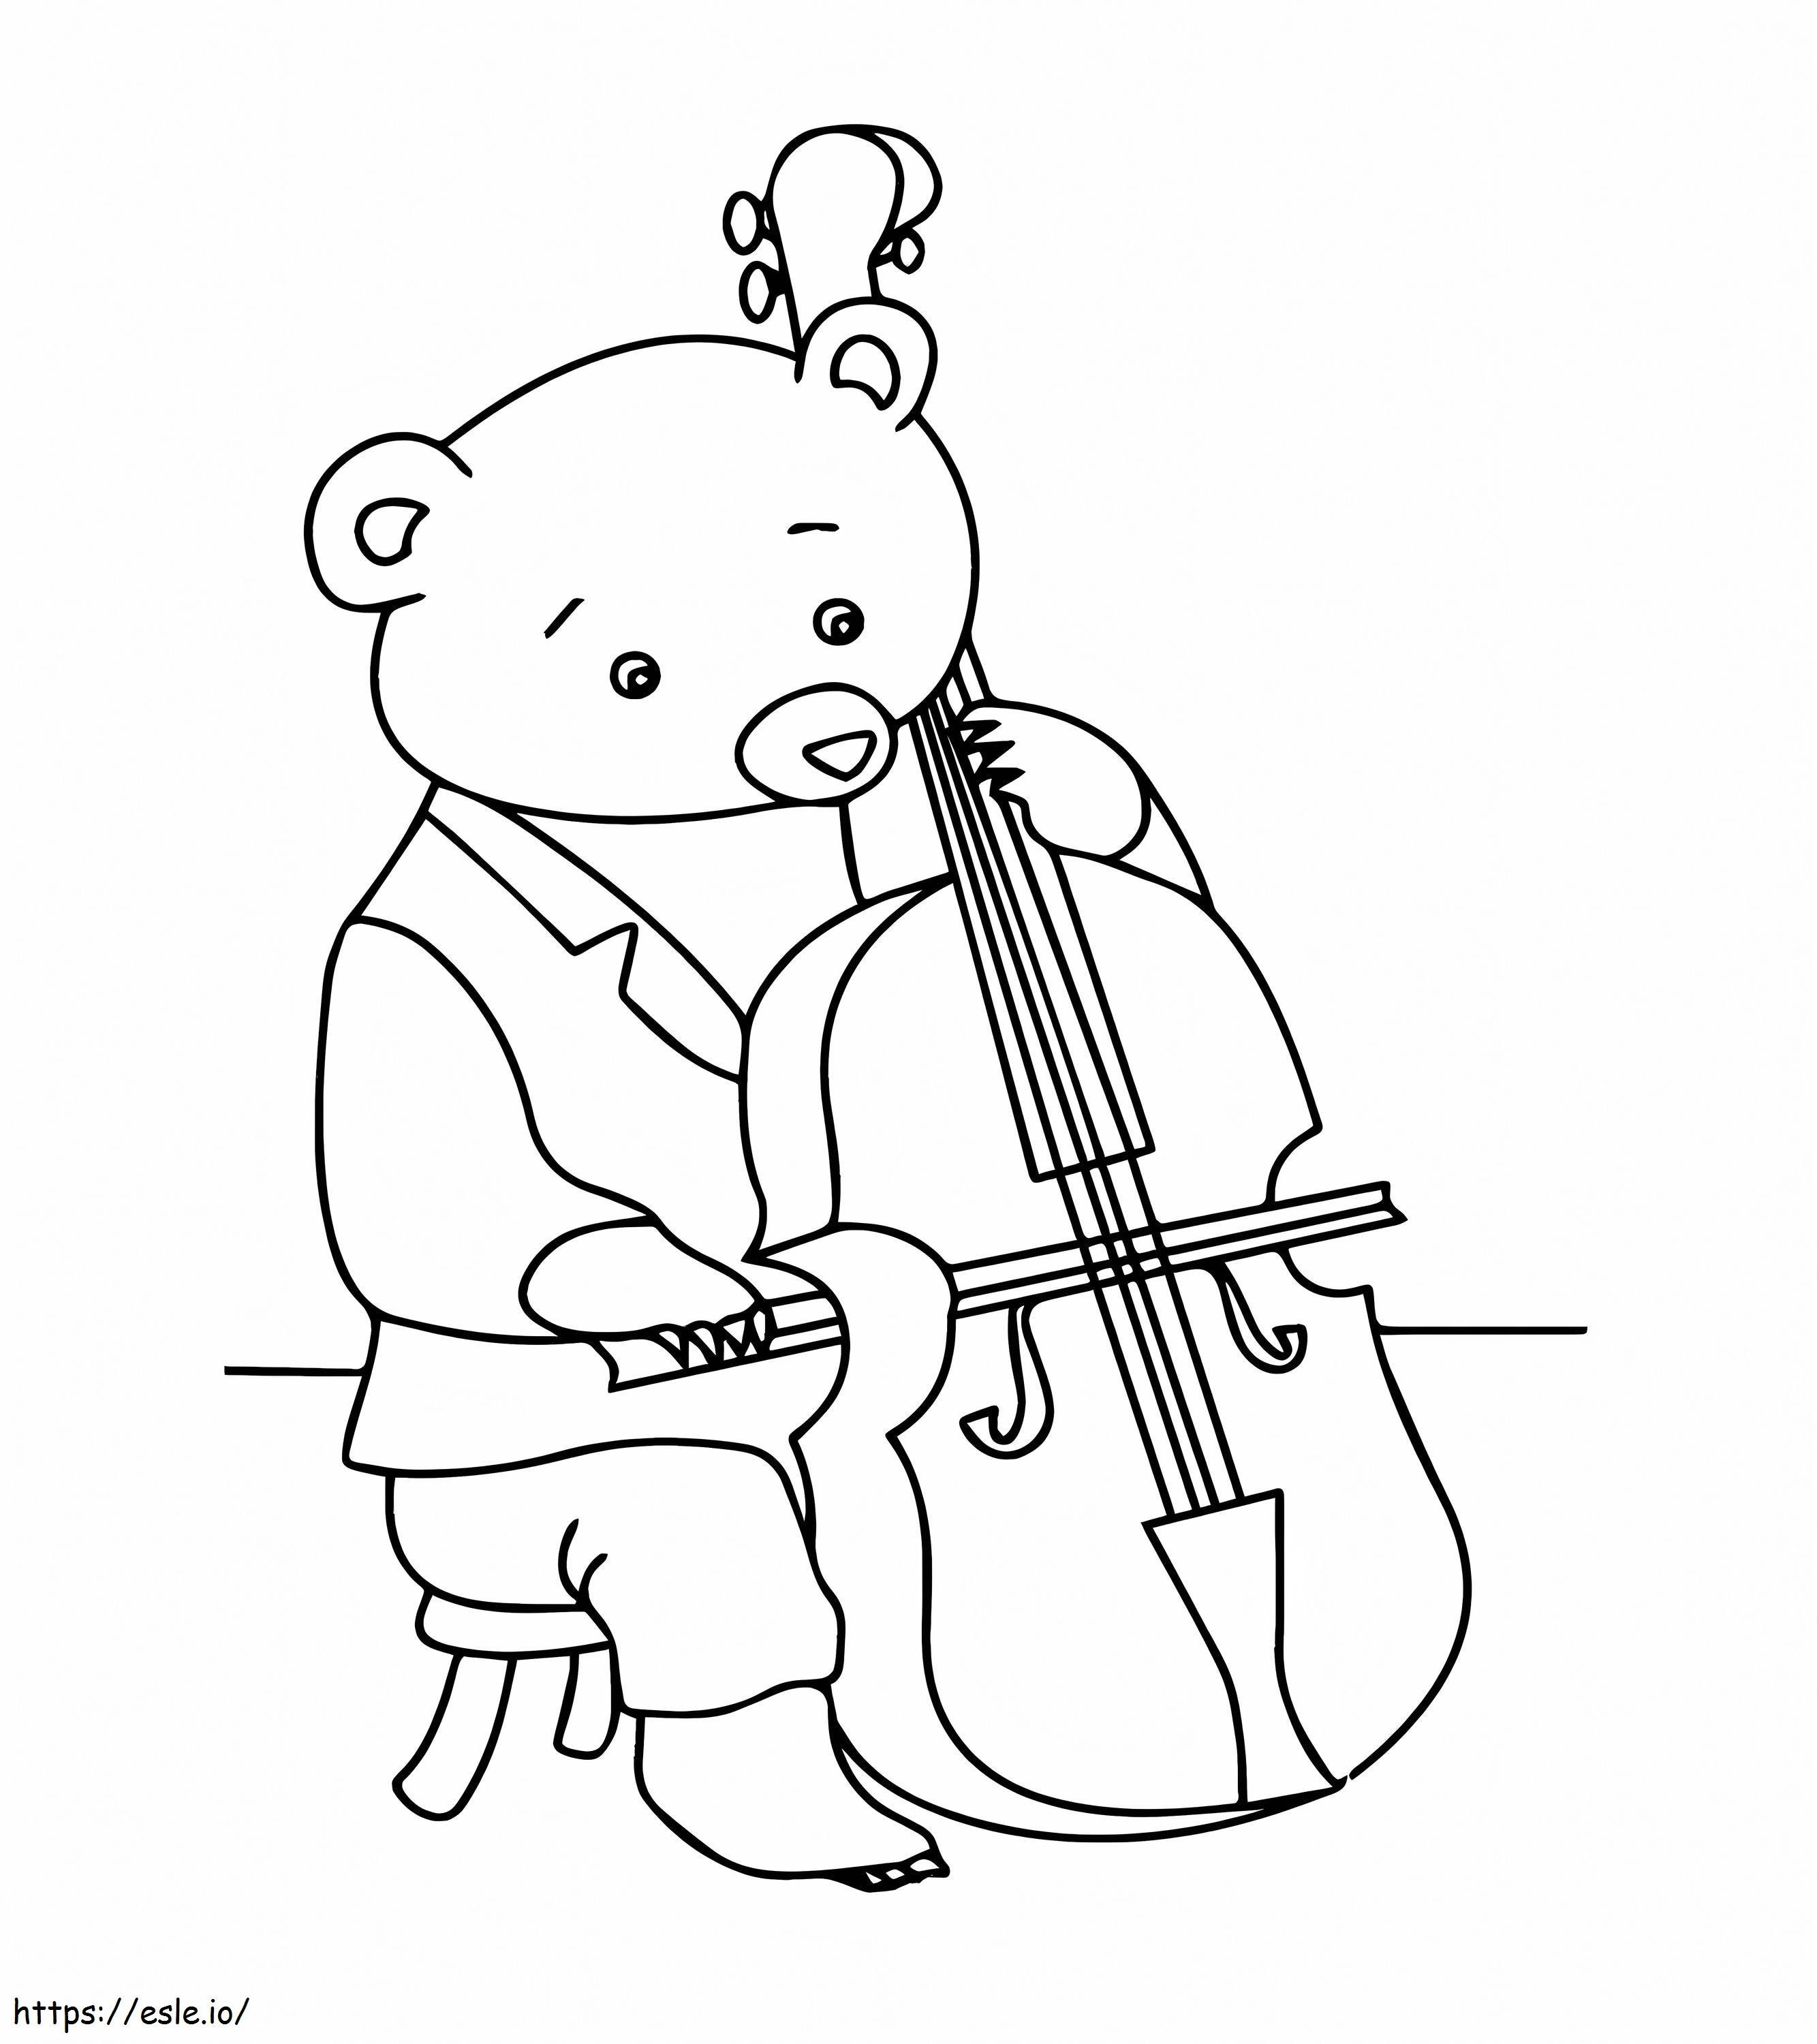 Bear Playing The Violin coloring page